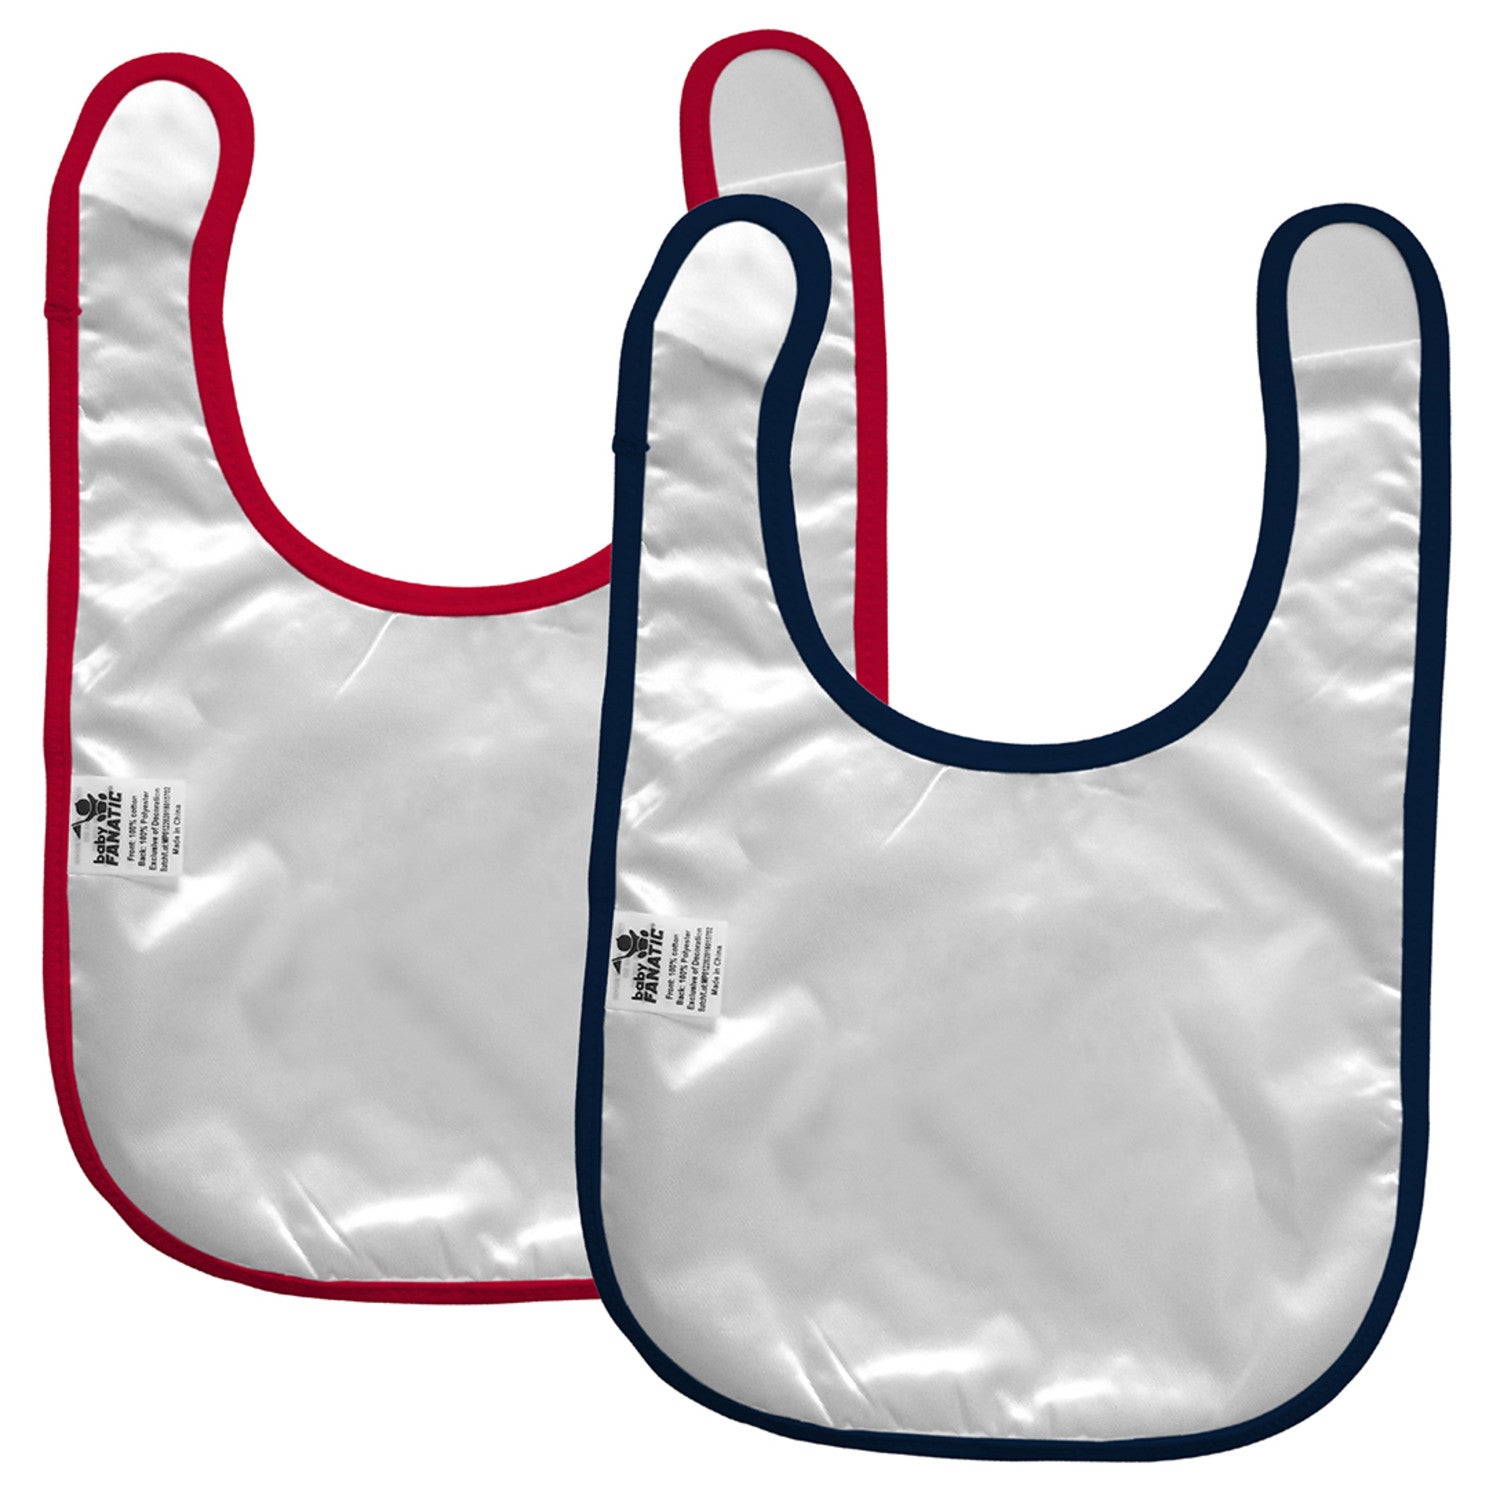 Boston Red Sox - Baby Bibs 2-Pack